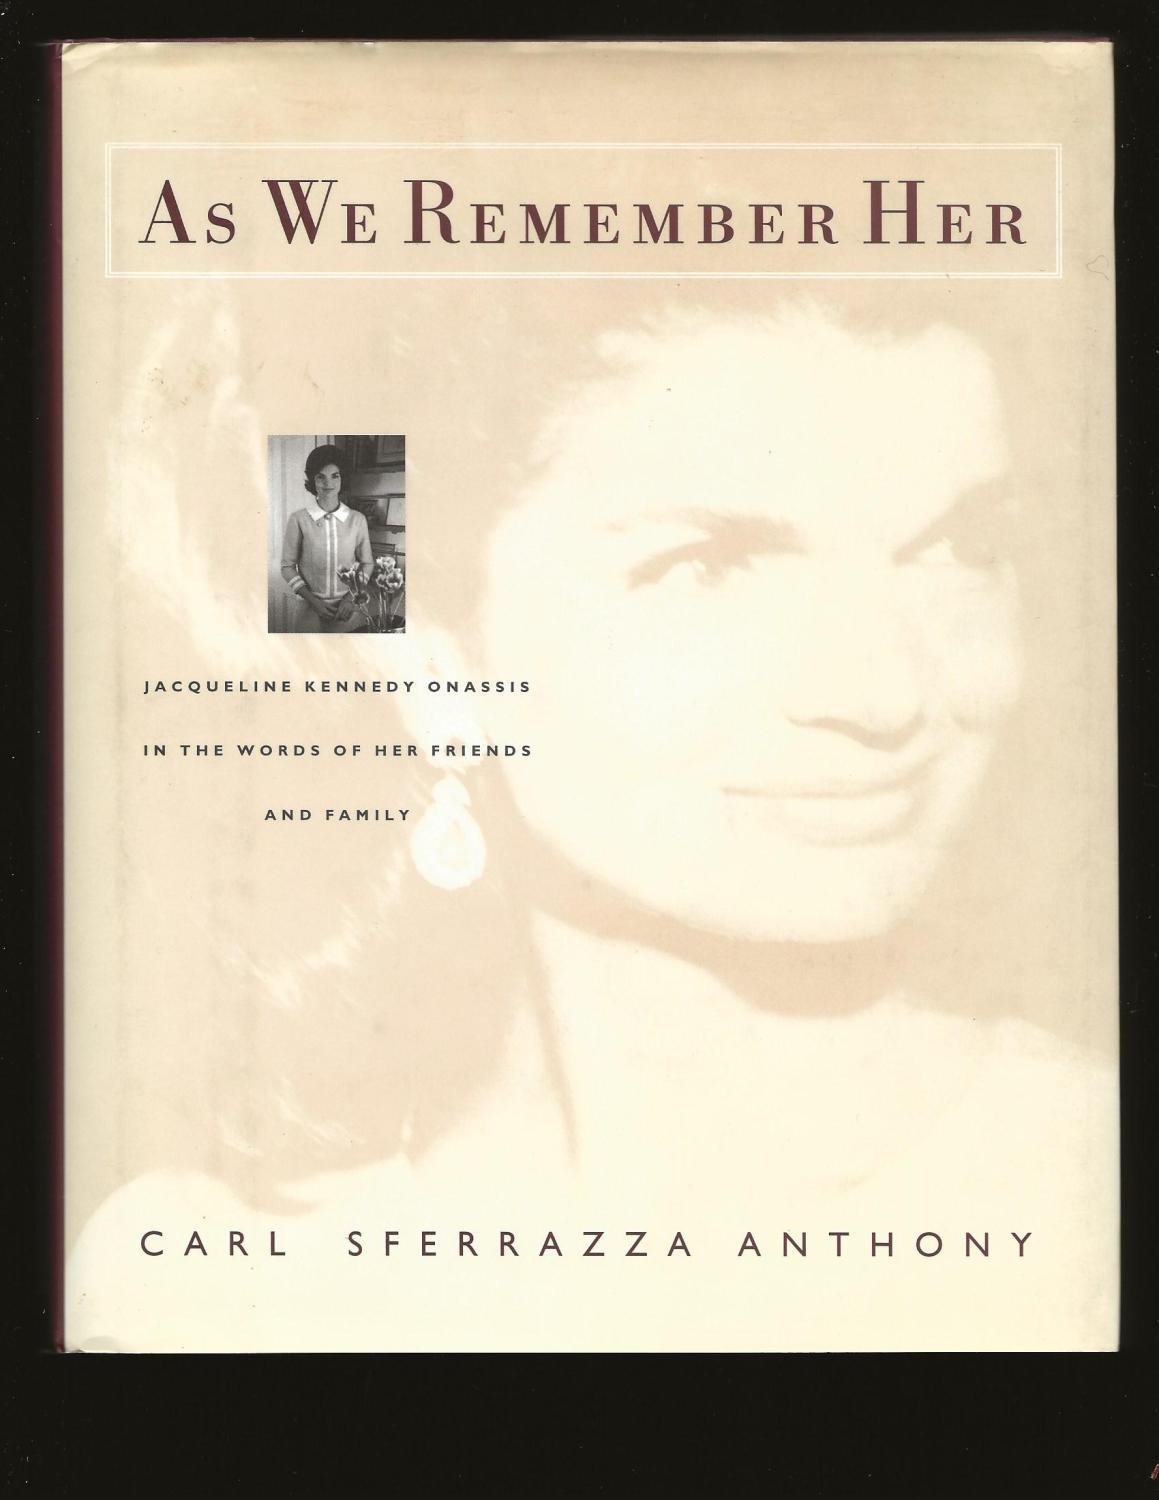 As We Remember Her: Jacqueline Kennedy Onassis In The Words Of Her Family And Friends (Signed and inscribed by the author to George Plimpton) - Carl Sferrazza Anthony